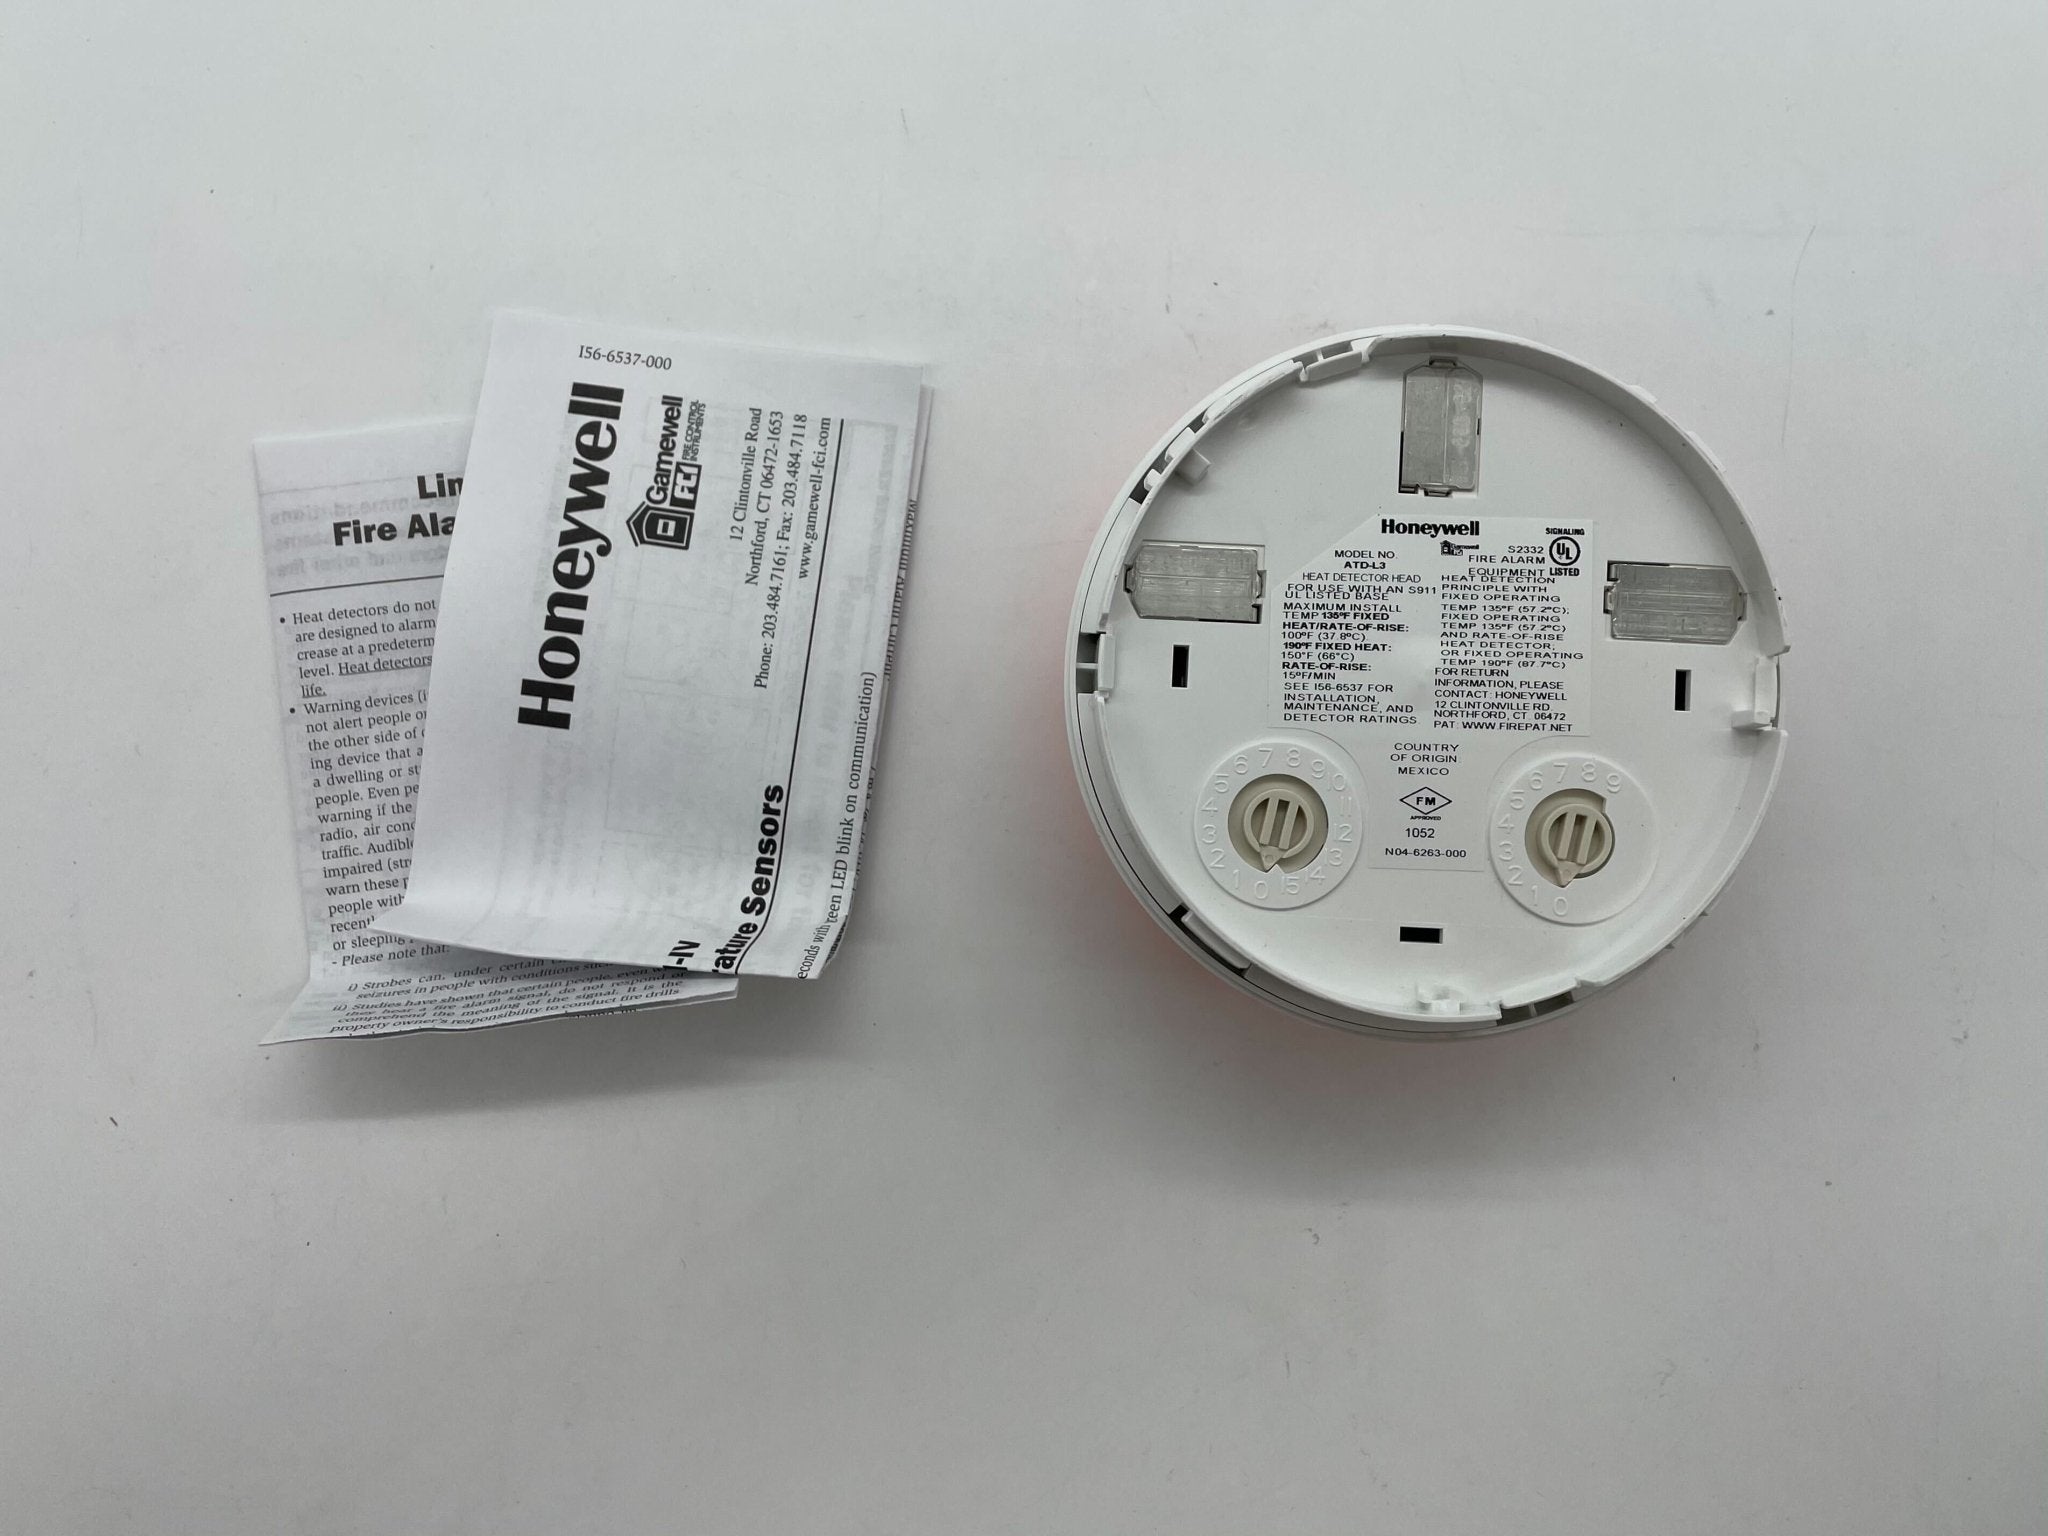 Gamewell-FCI ATD-L3 - The Fire Alarm Supplier